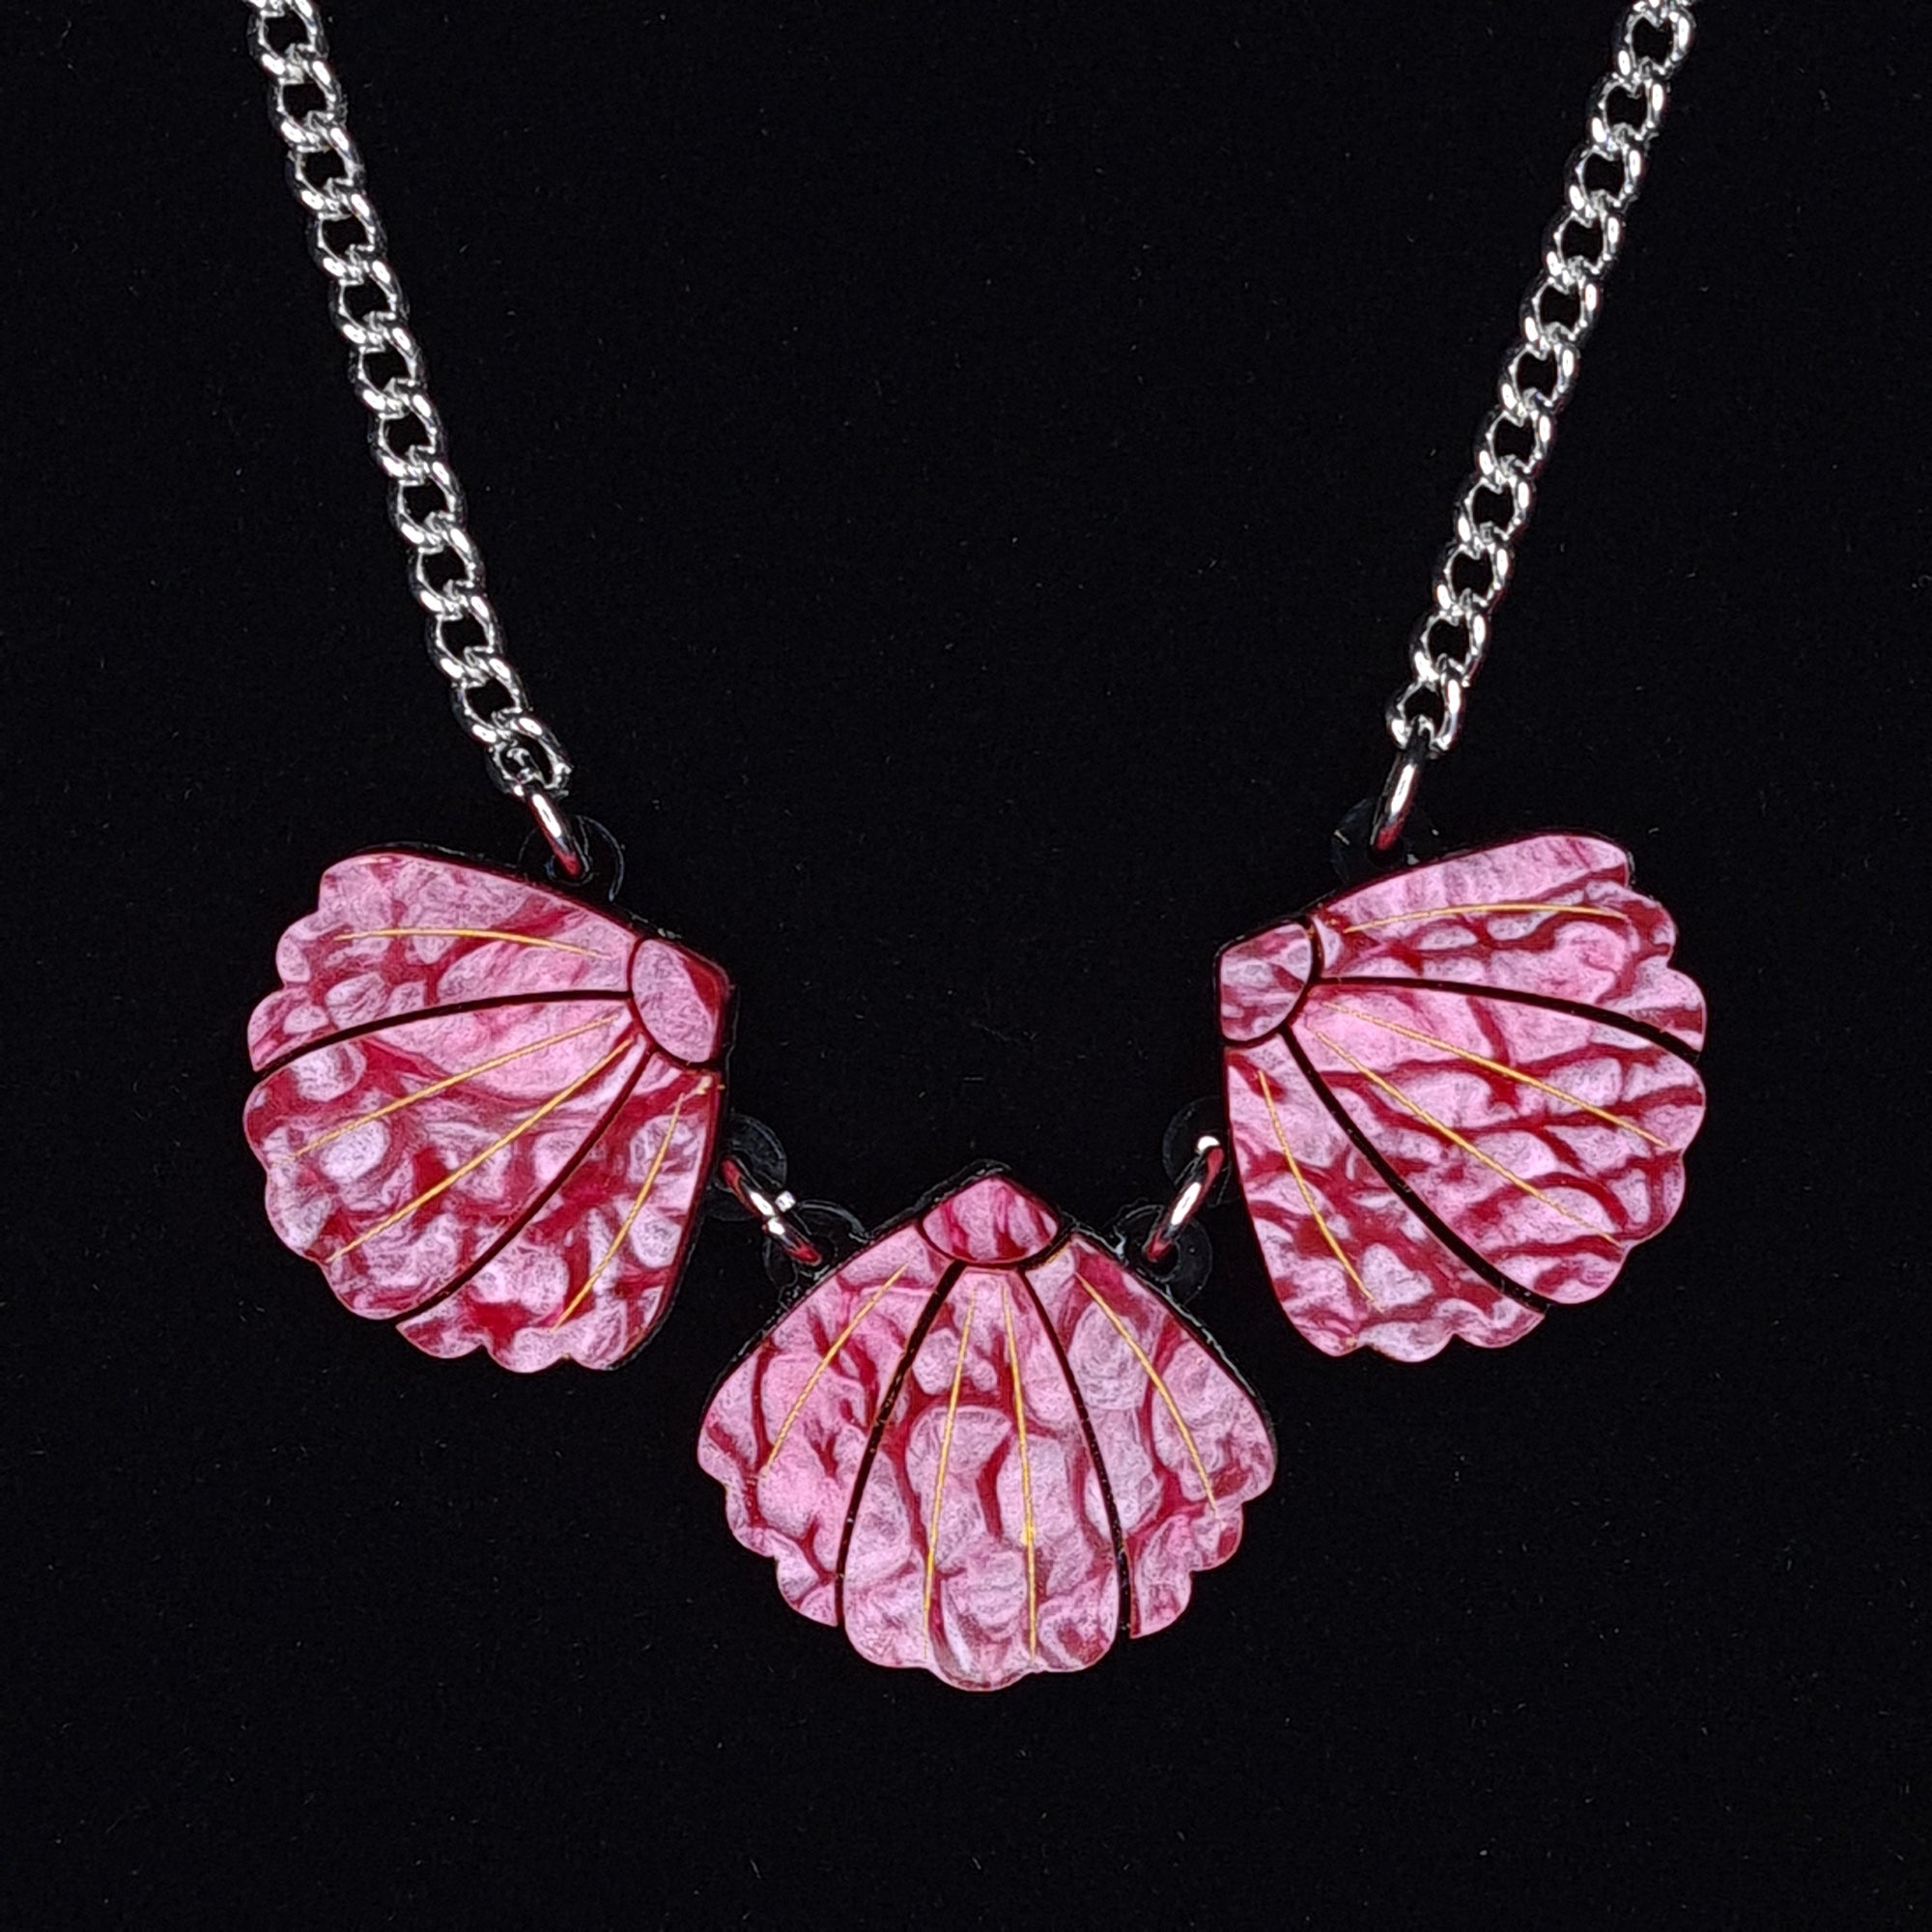 Triple Shell Necklace (Pink) by Lou Taylor